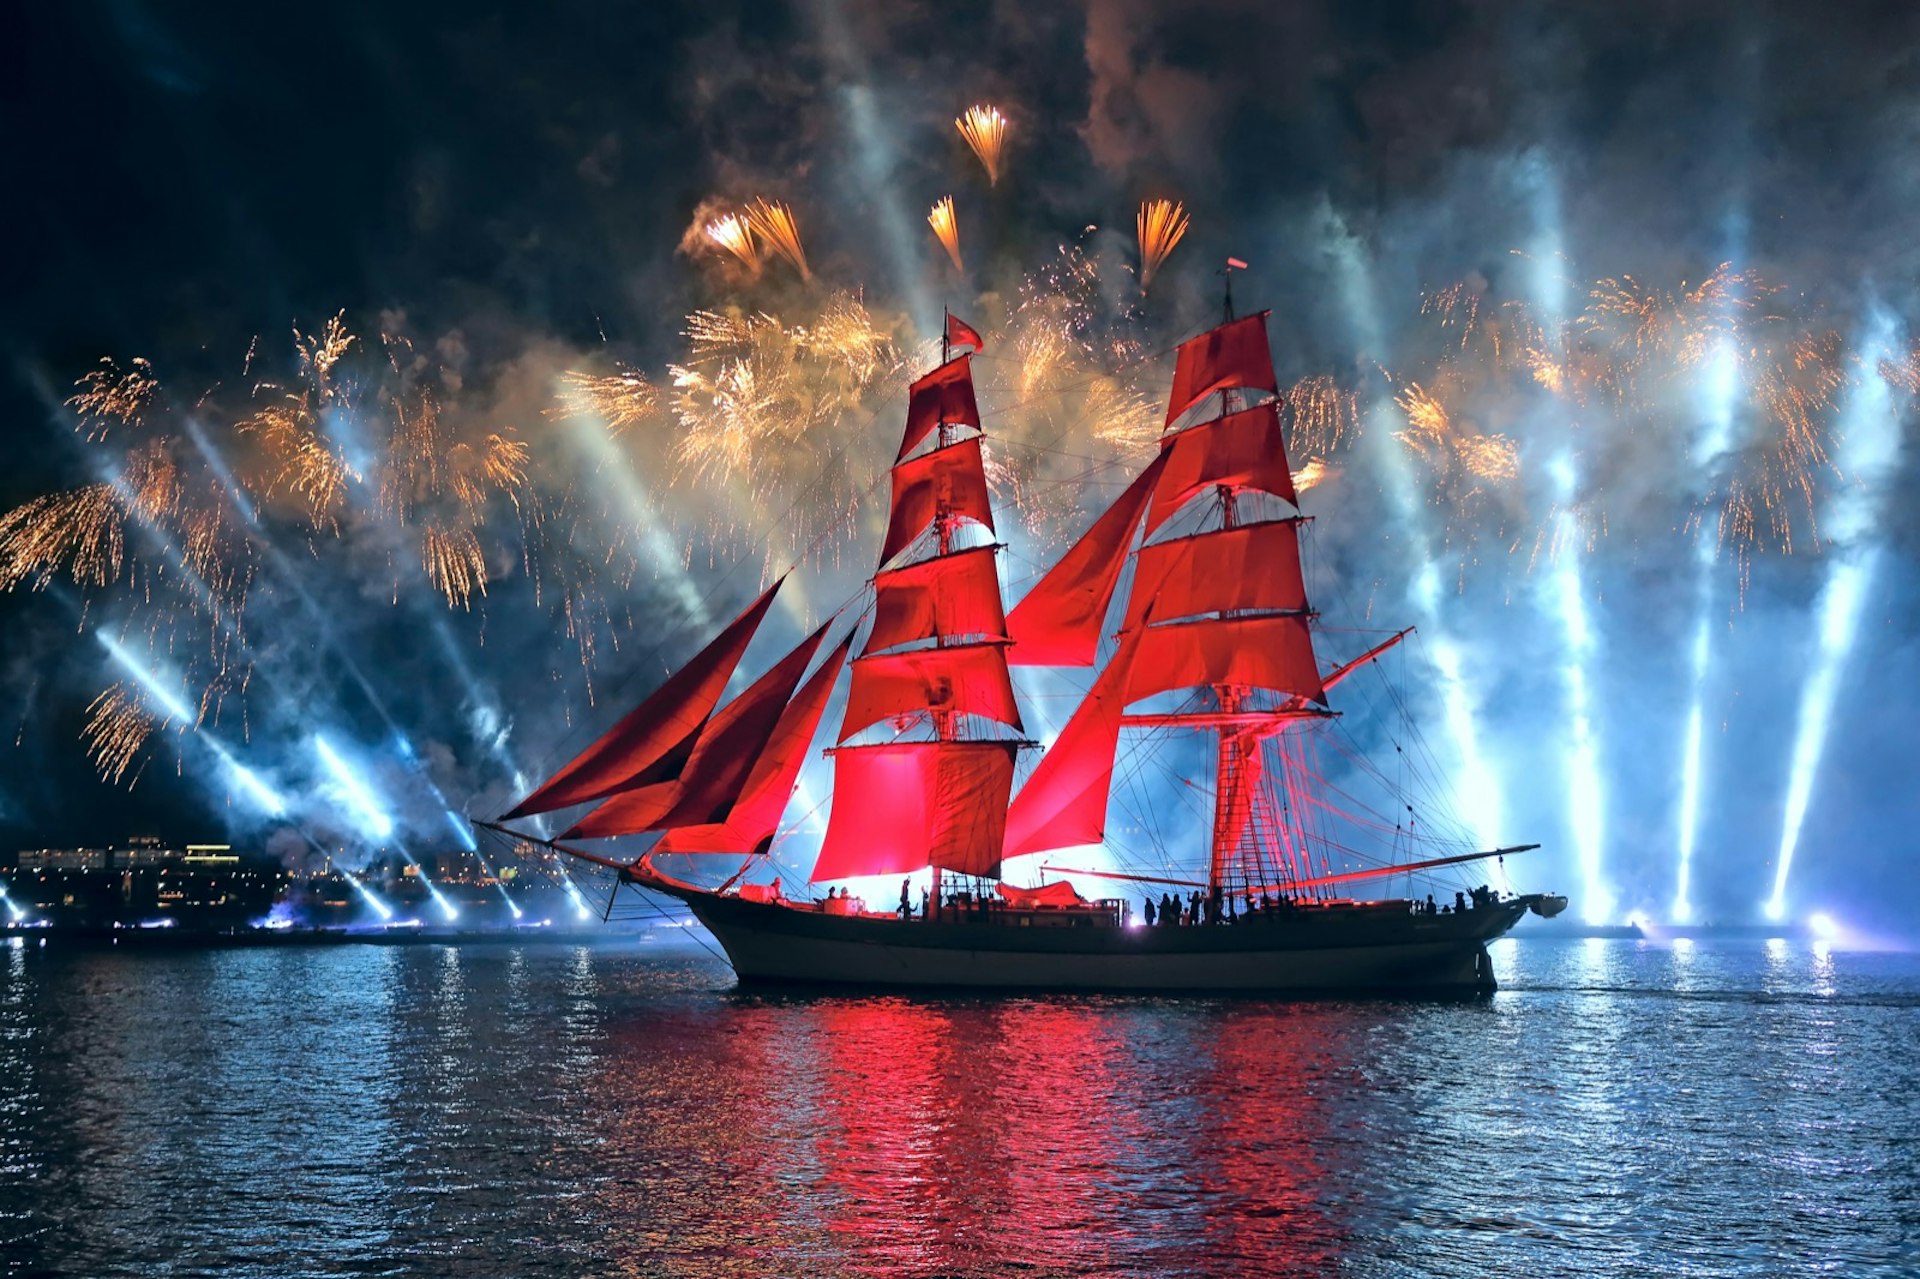 Fireworks go off behind a ship with scarlet sails on the water in celebration of Summer Solstice or White Nights as it's known in Russia. Huge strobe lights shine in the background. 